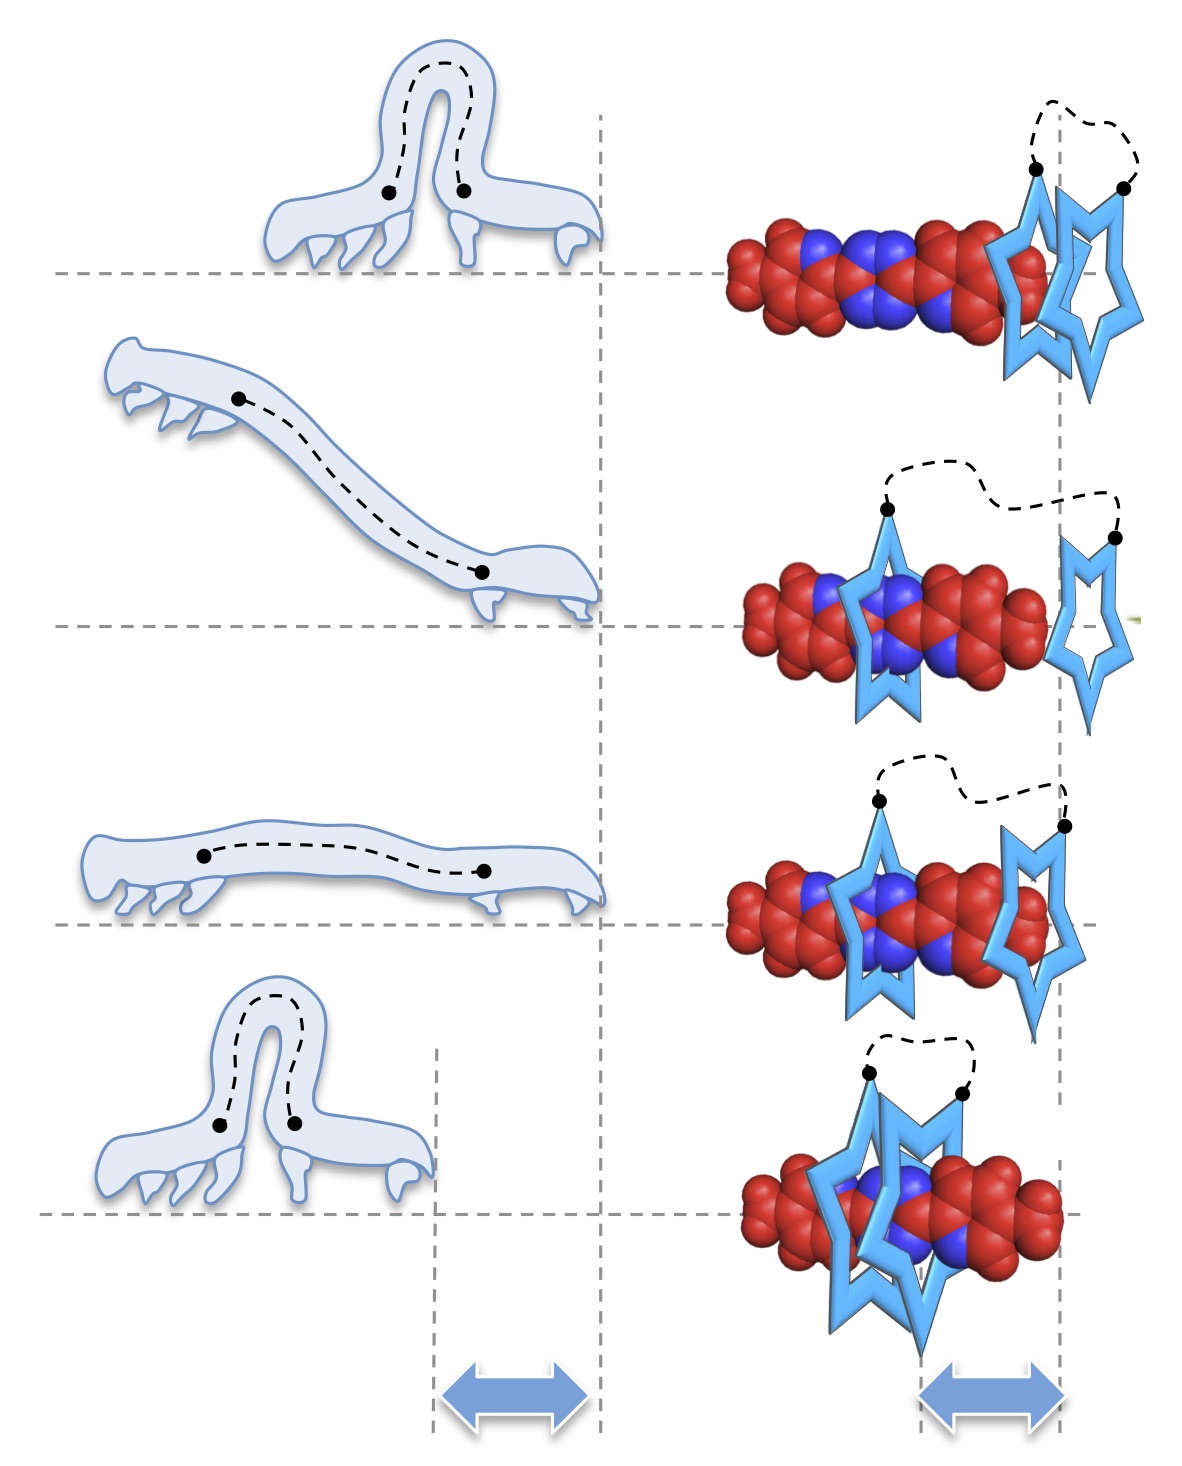 Inchworm movement of two rings switching onto a thread by biased Brownian diffusion: a three-body problem